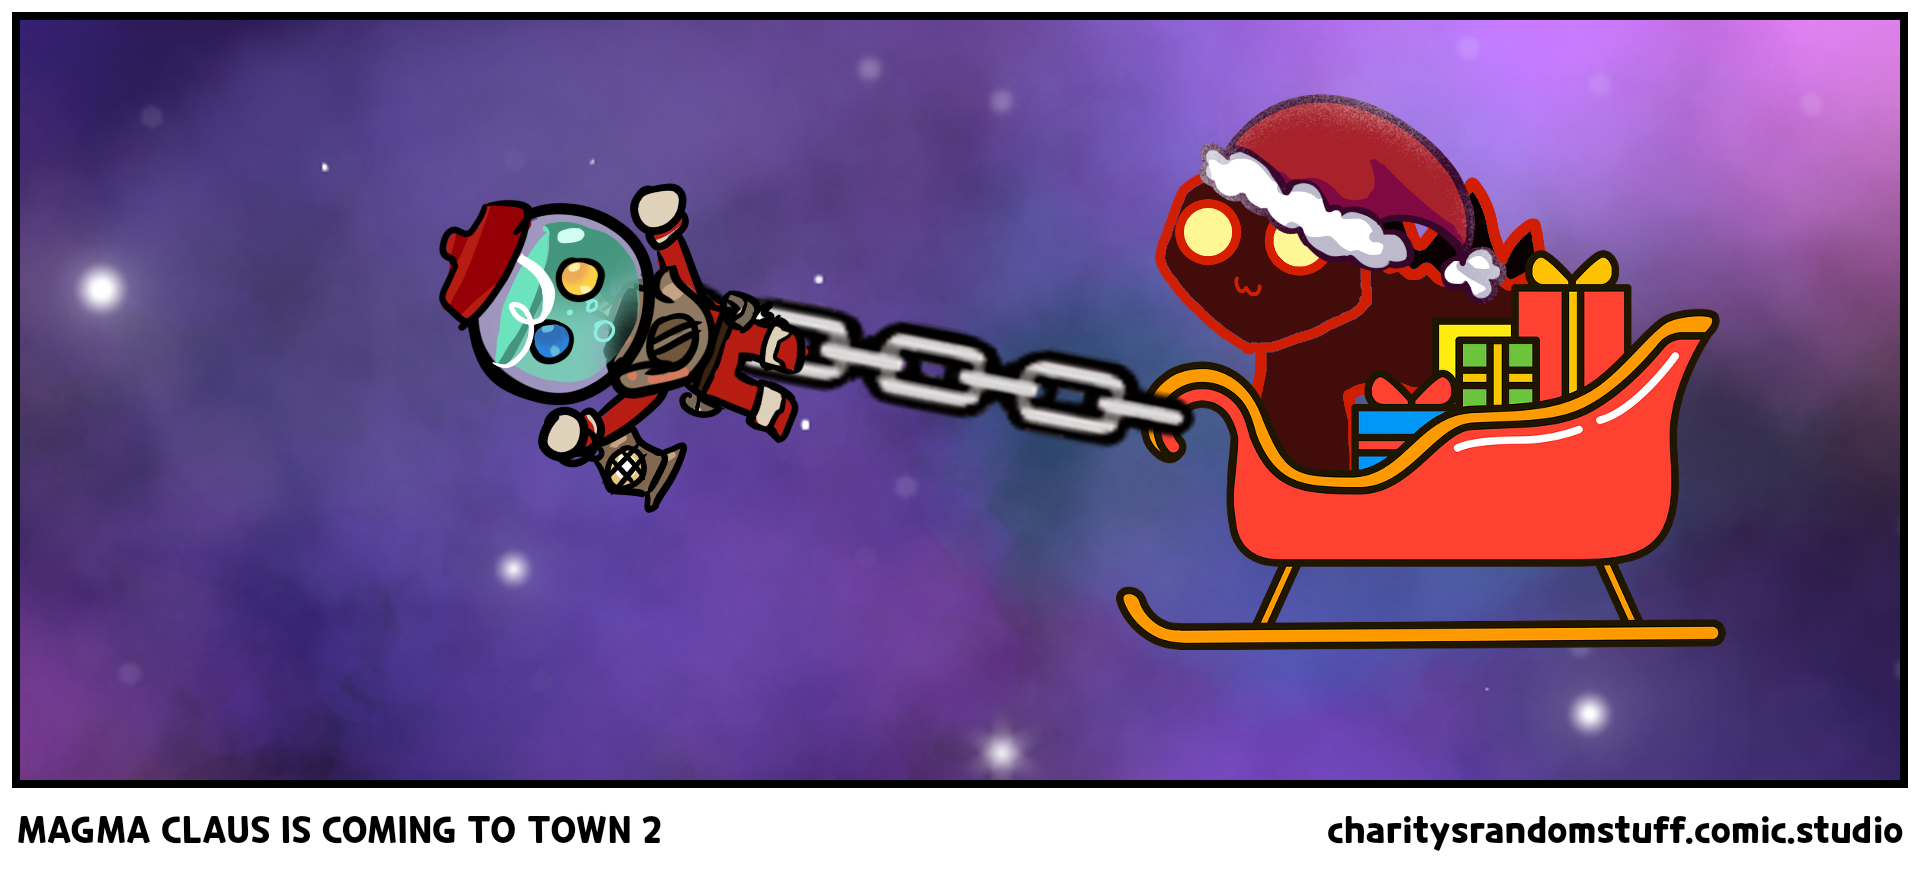 MAGMA CLAUS IS COMING TO TOWN 2